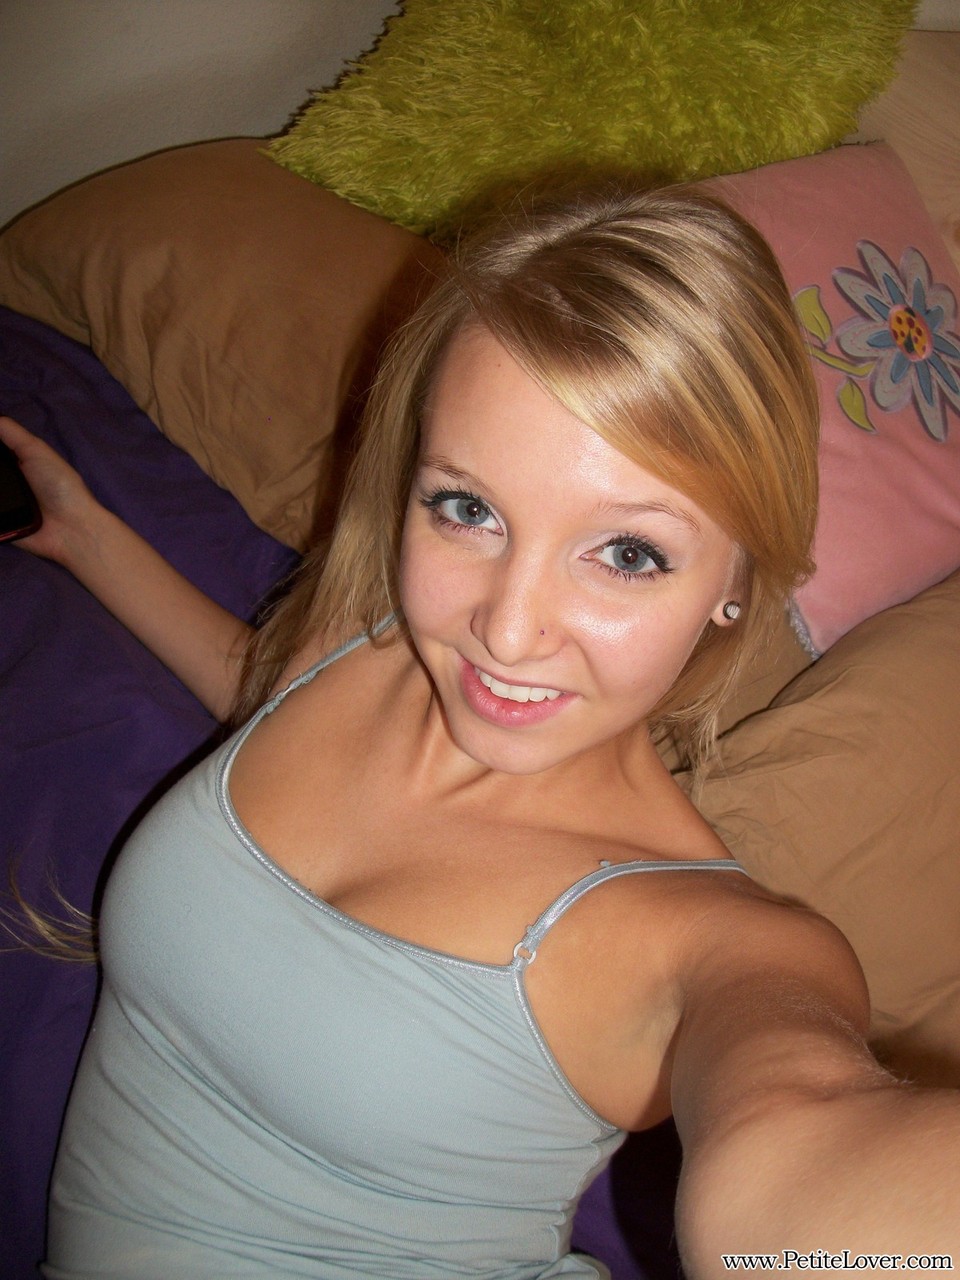 Cute teen girl with blonde hair displays her hairless pussy on her photo